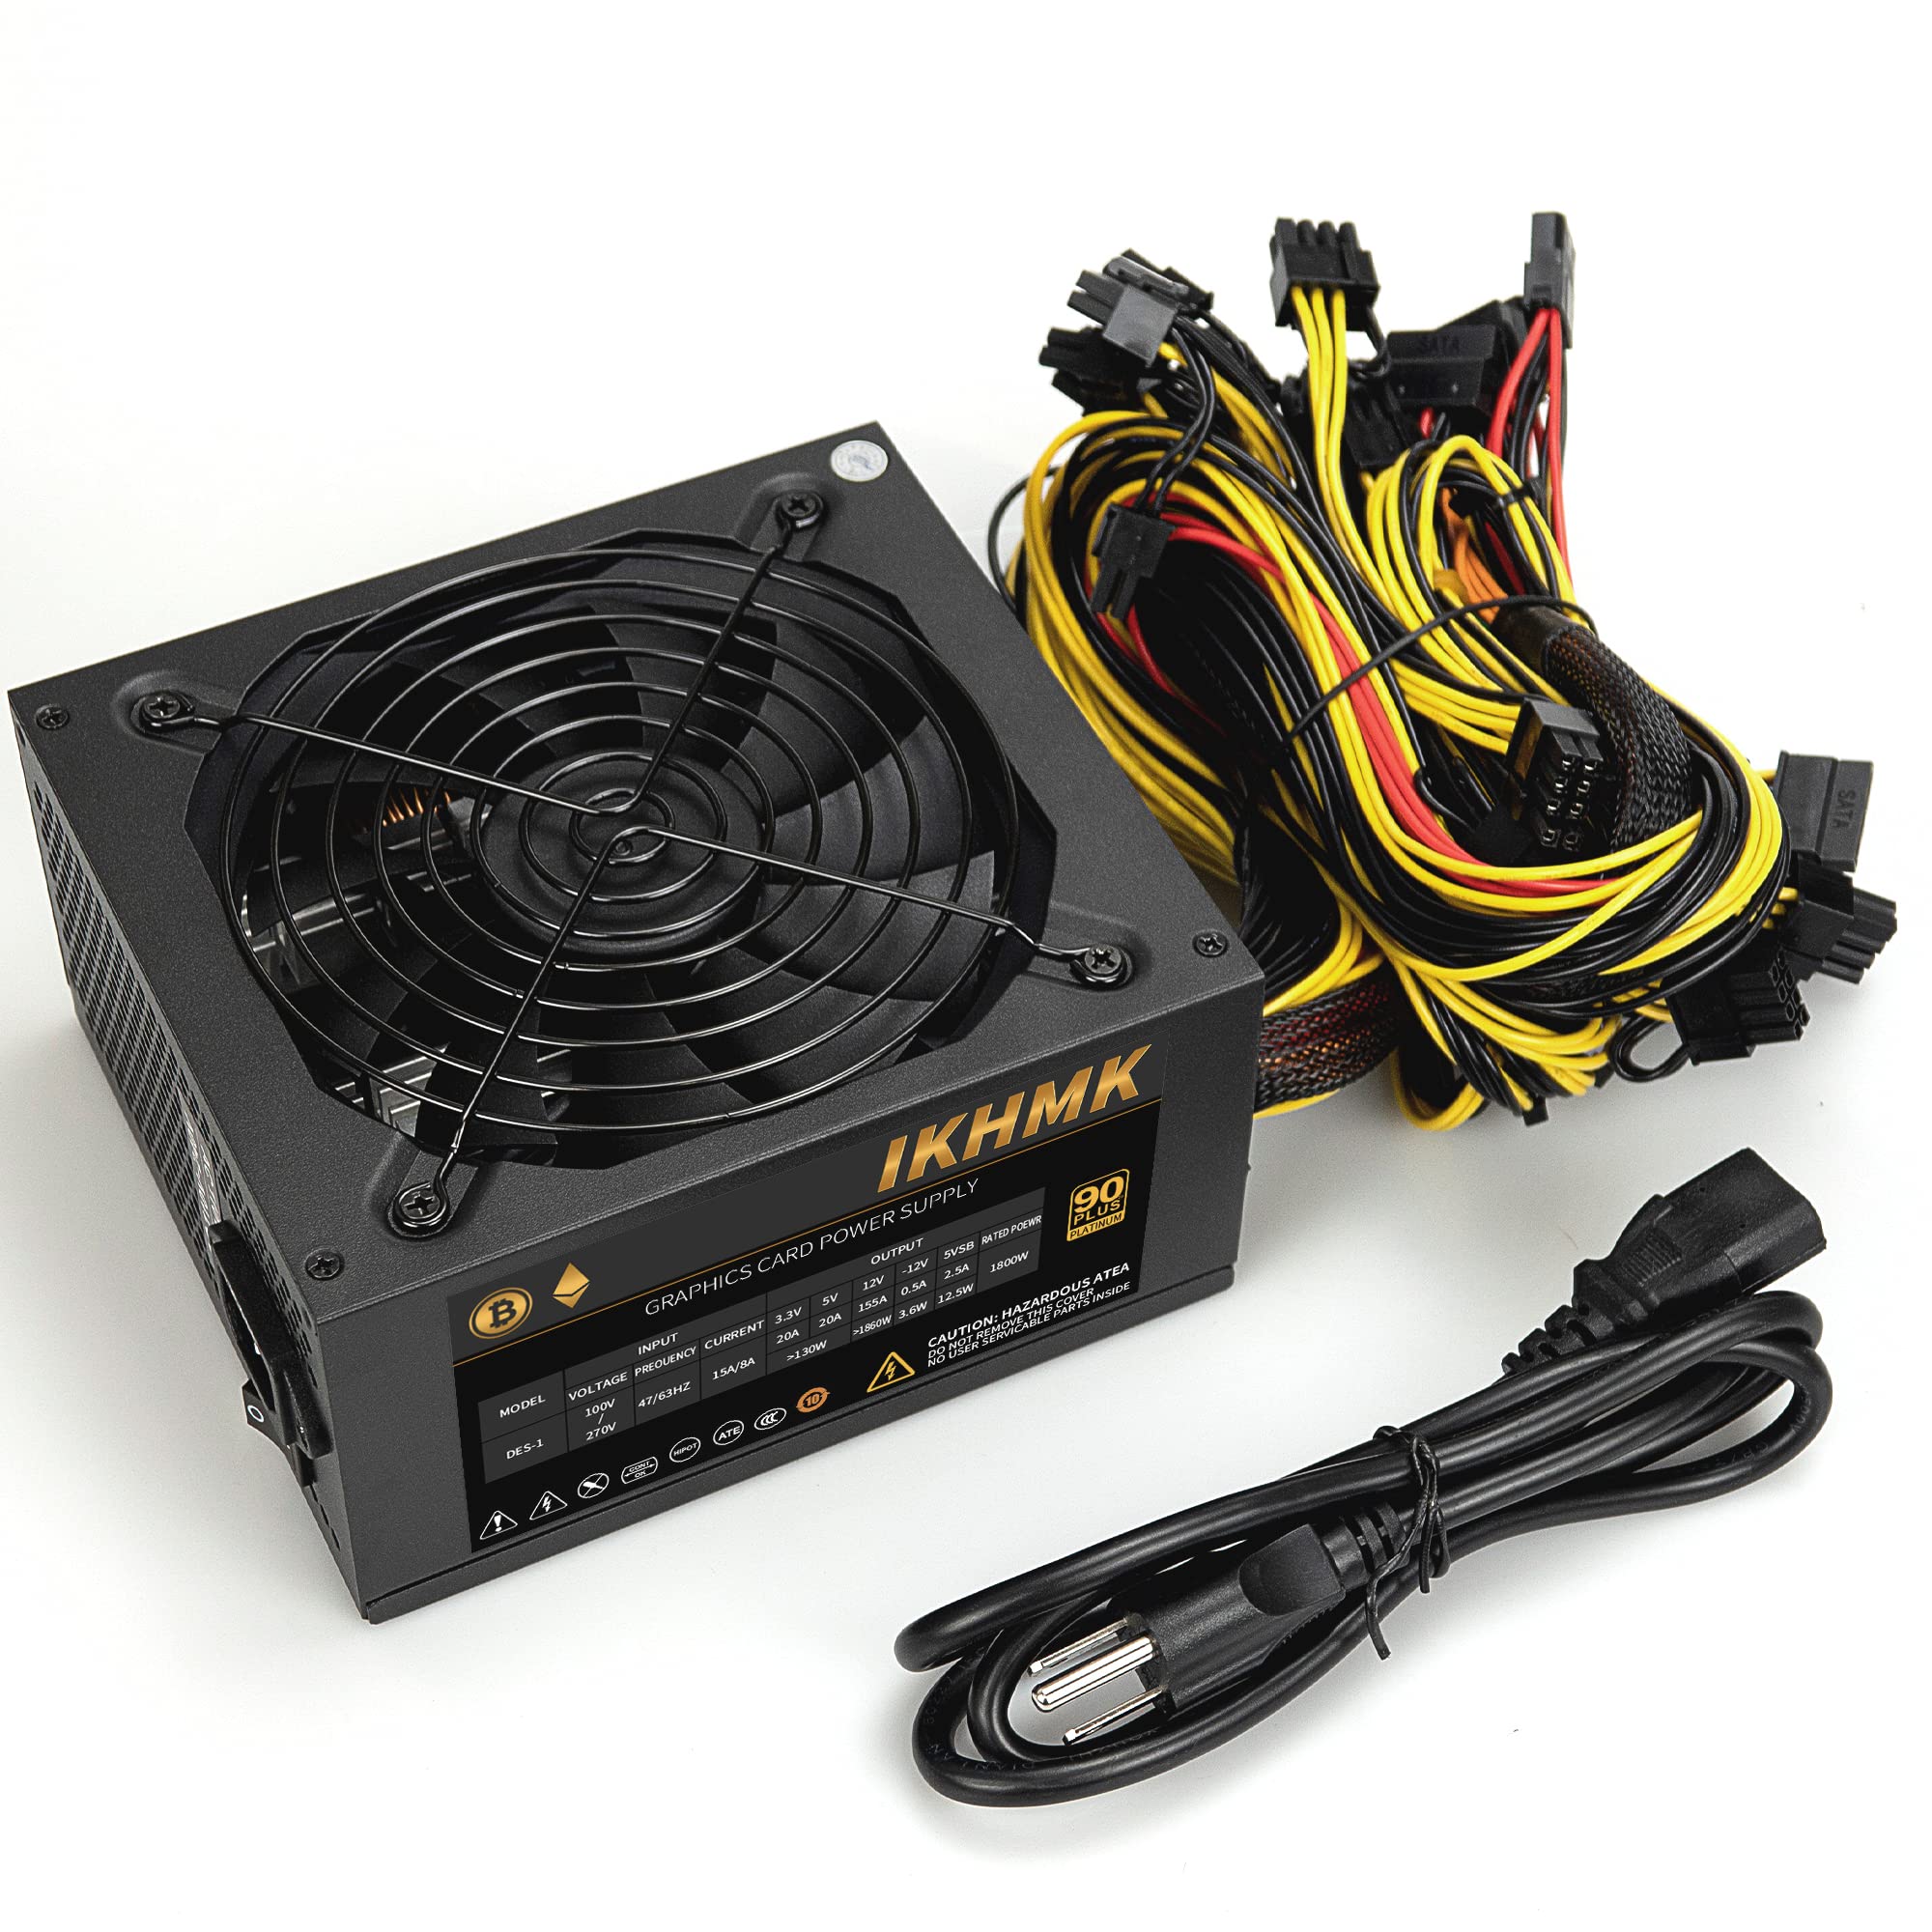 1800W Mining Power Supply 100V-270V PC Power PSU Supports 8 GPU Rig for ETH Bitcoin Ethereum Miner with Power Cord